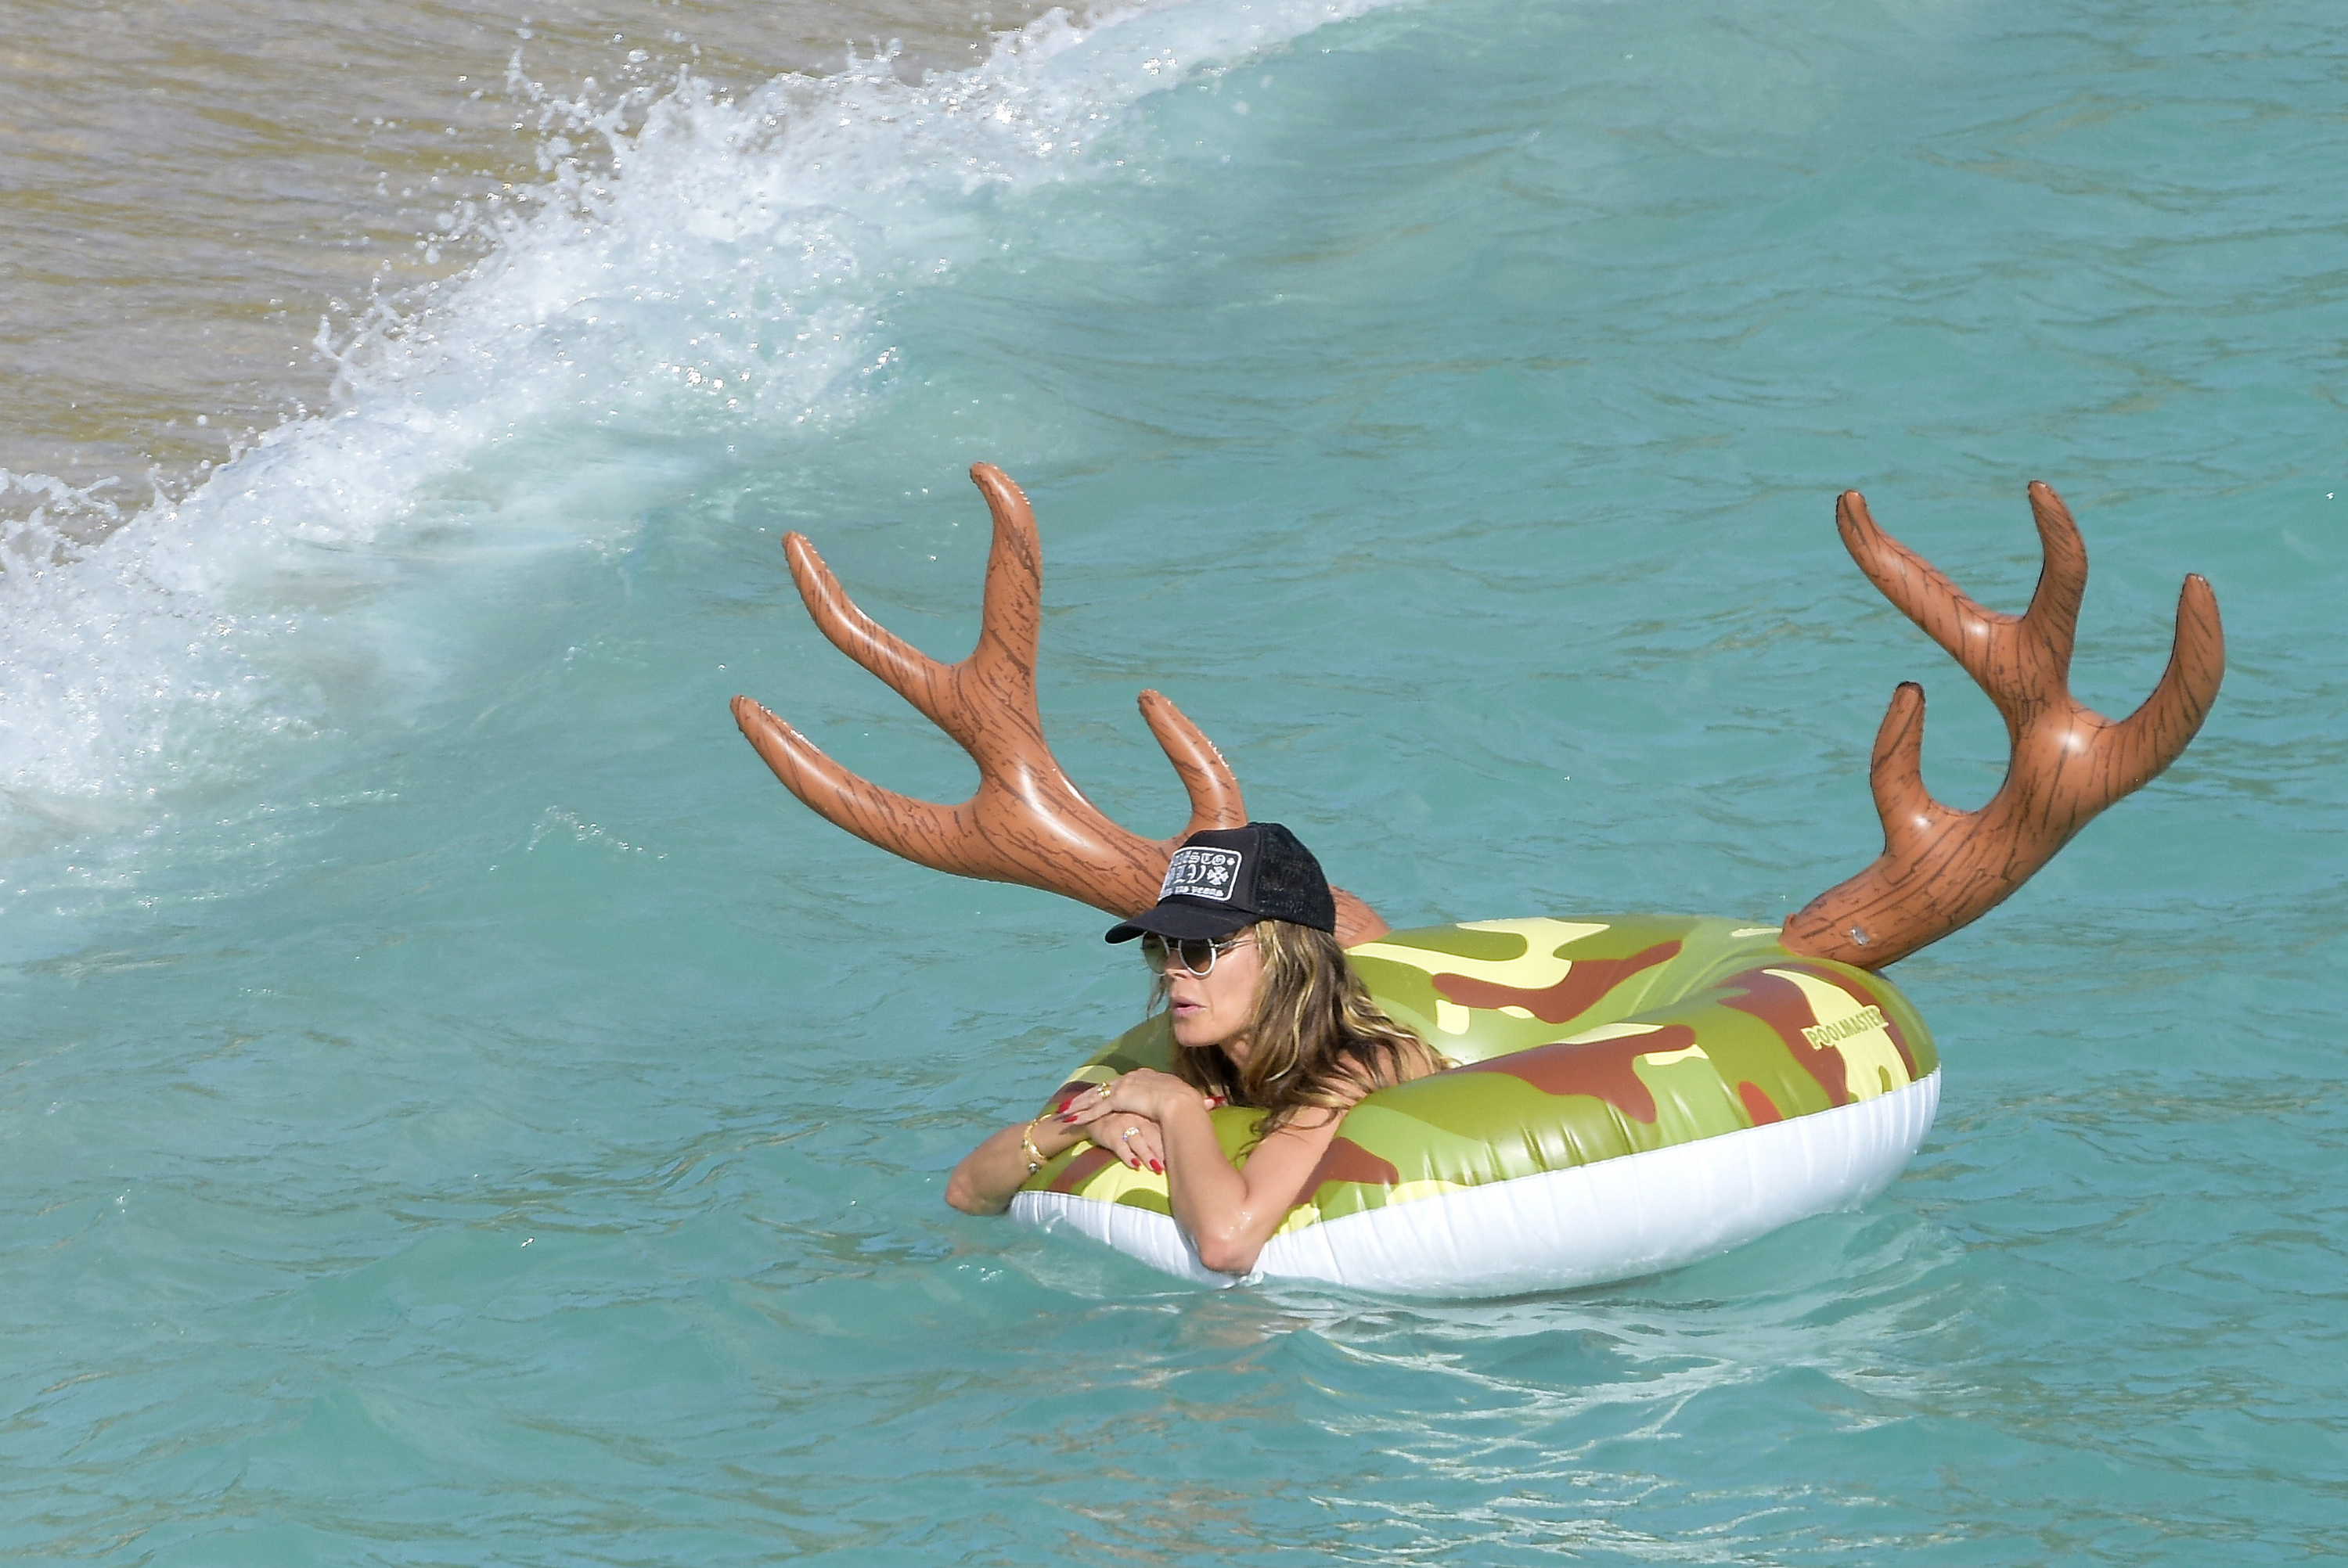 She swam in the water with a massive pool tube with antlers sticking out of it